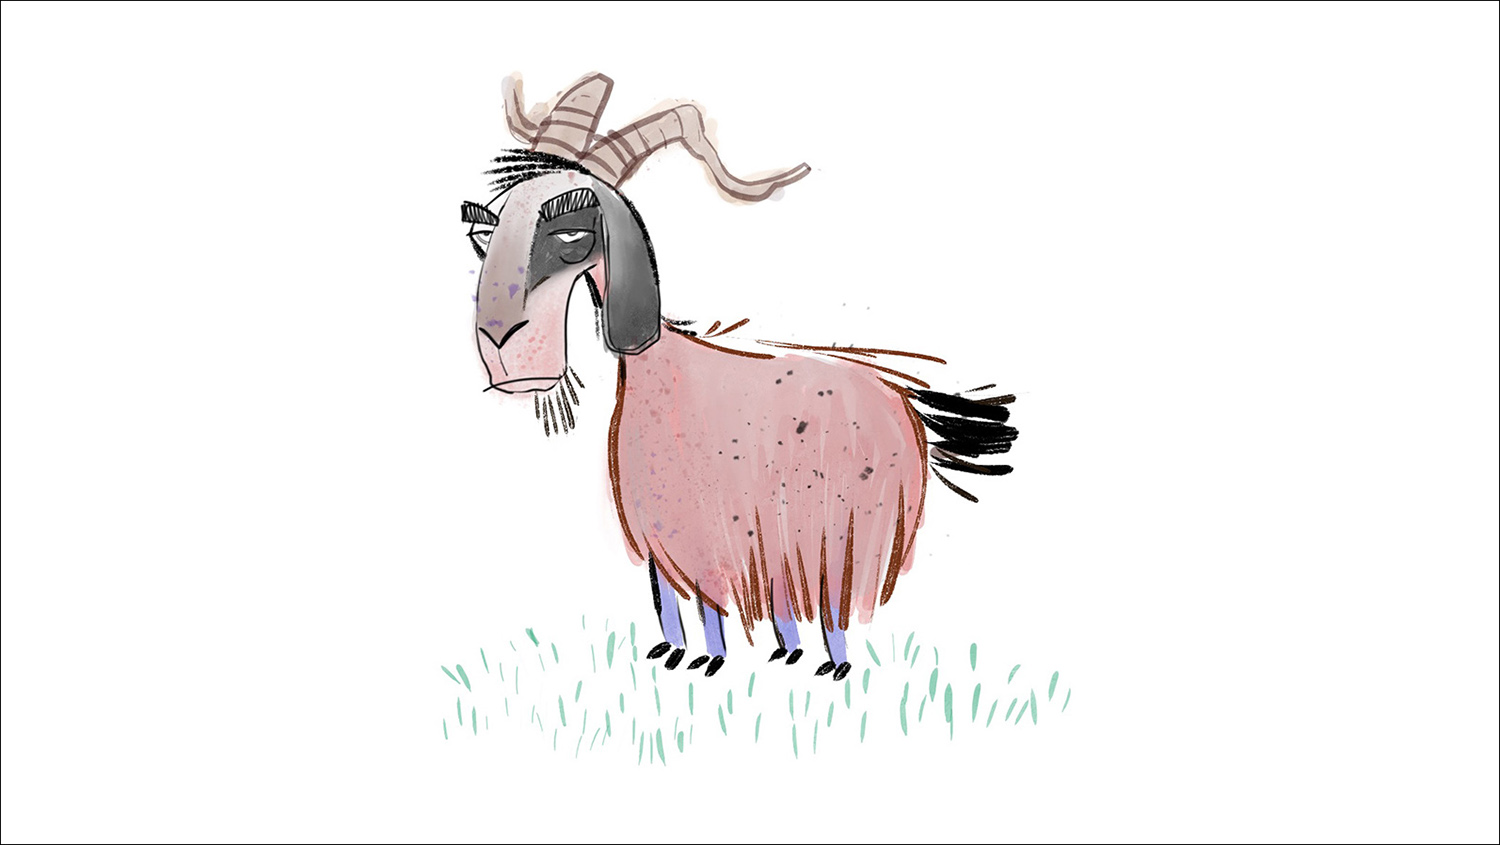 A goat as the logo of "That Damn Goat" — a video game being developed in MAGIC Spell Studios.